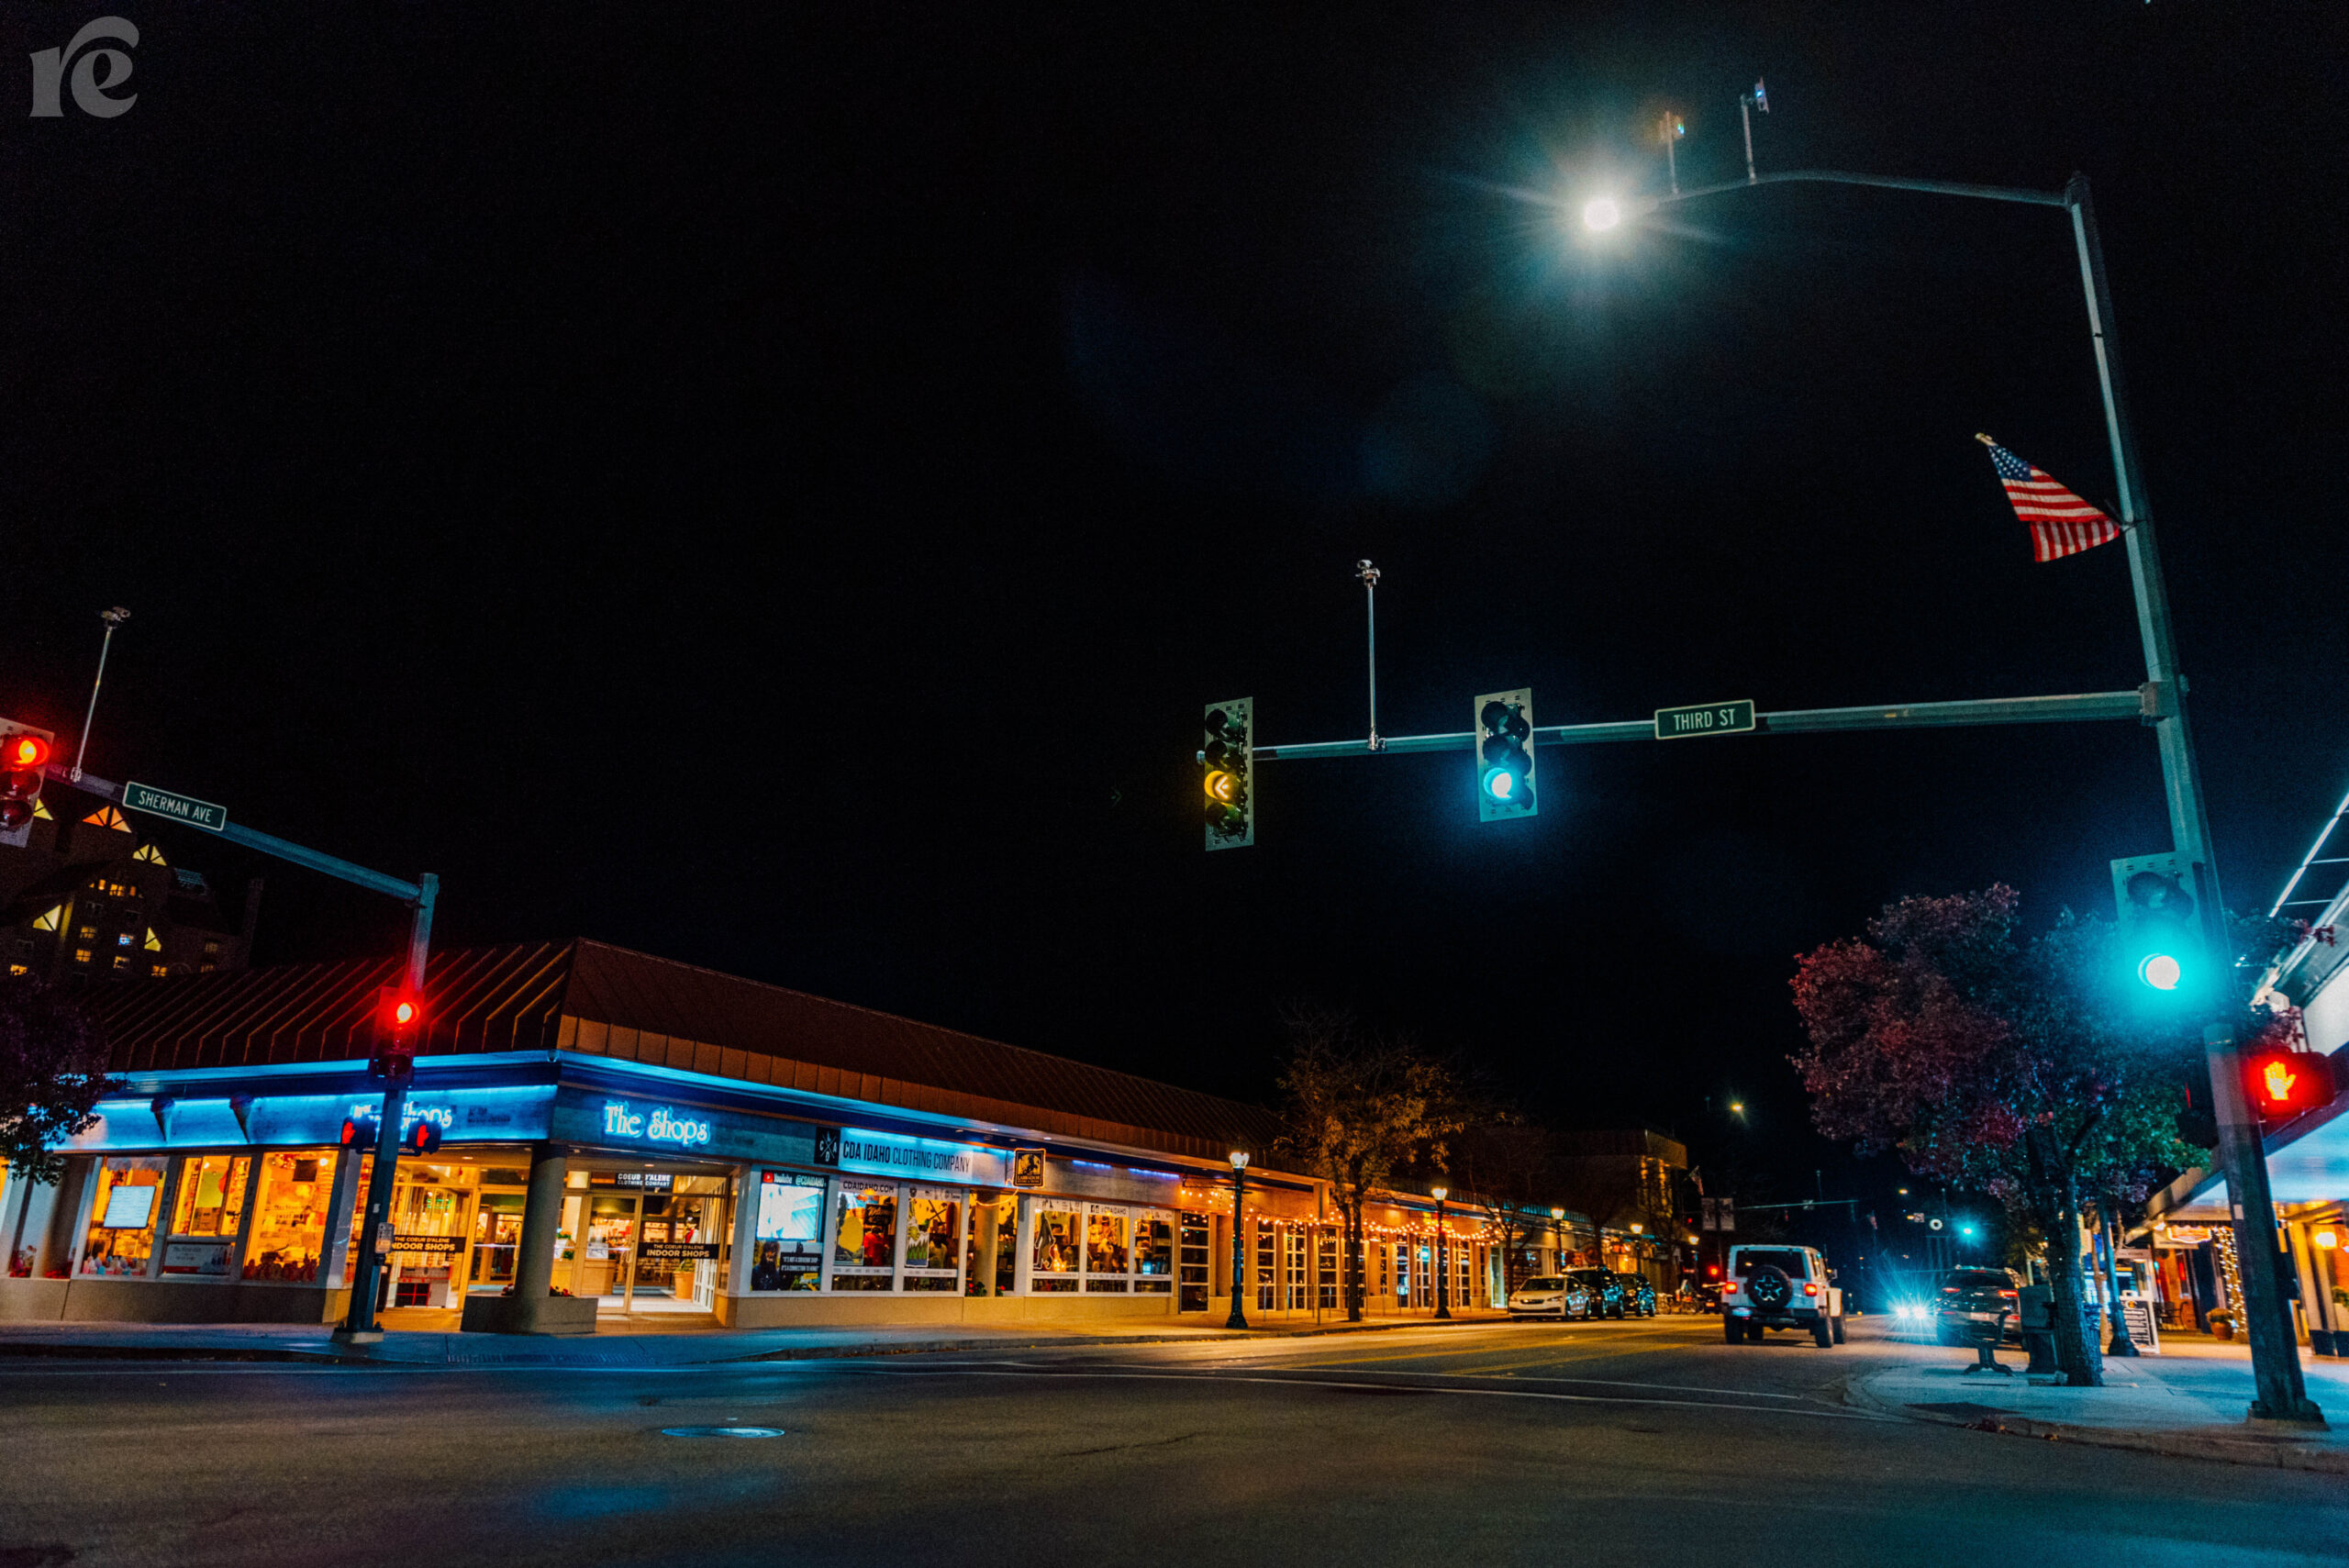 An intersection in Coeur D'Alene at night.